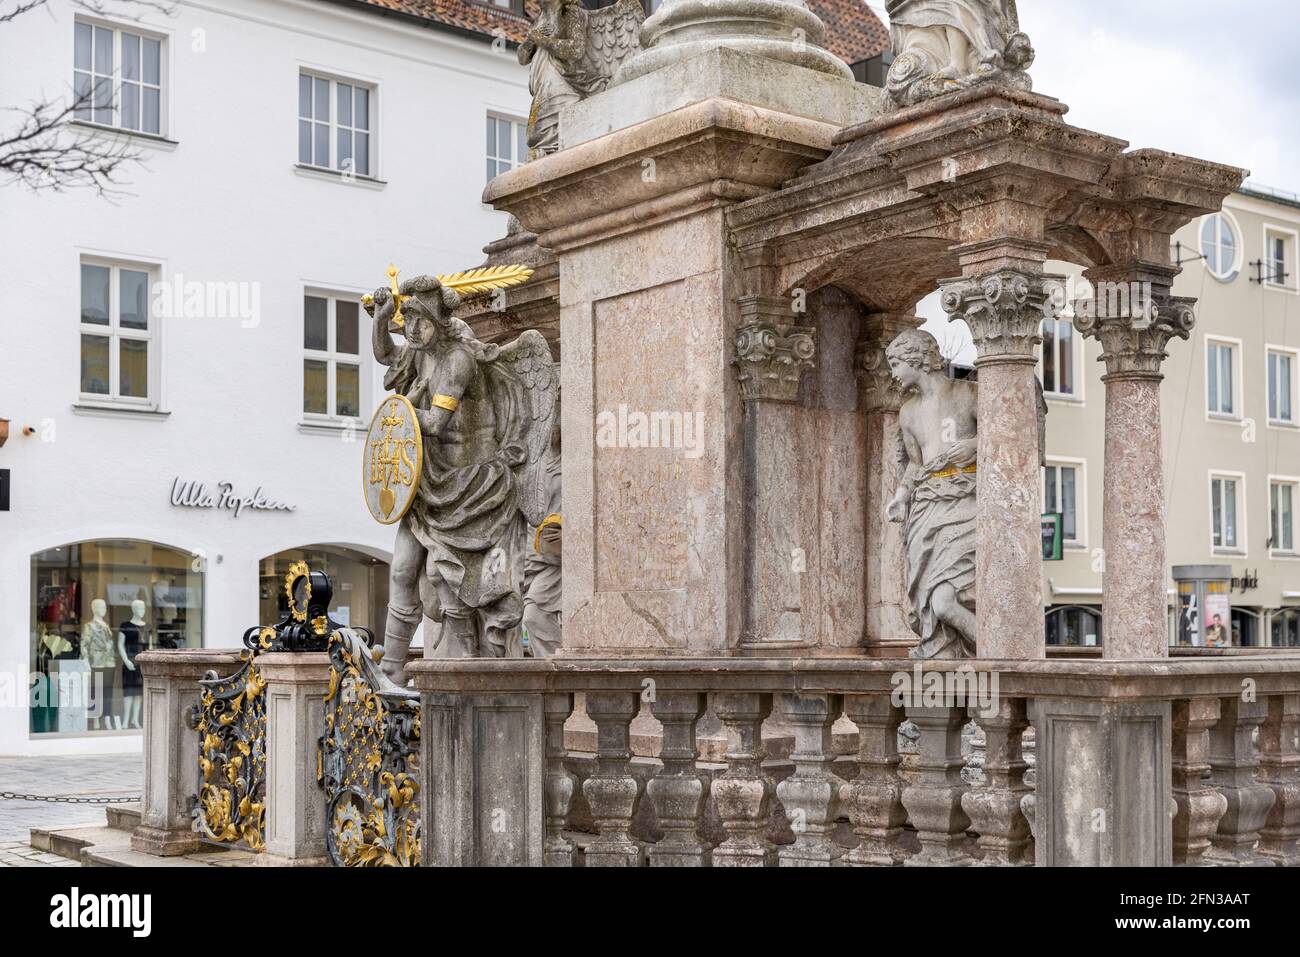 Historical gothic style statue and fountain in Bavarian city Straubing in Germany. Stock Photo